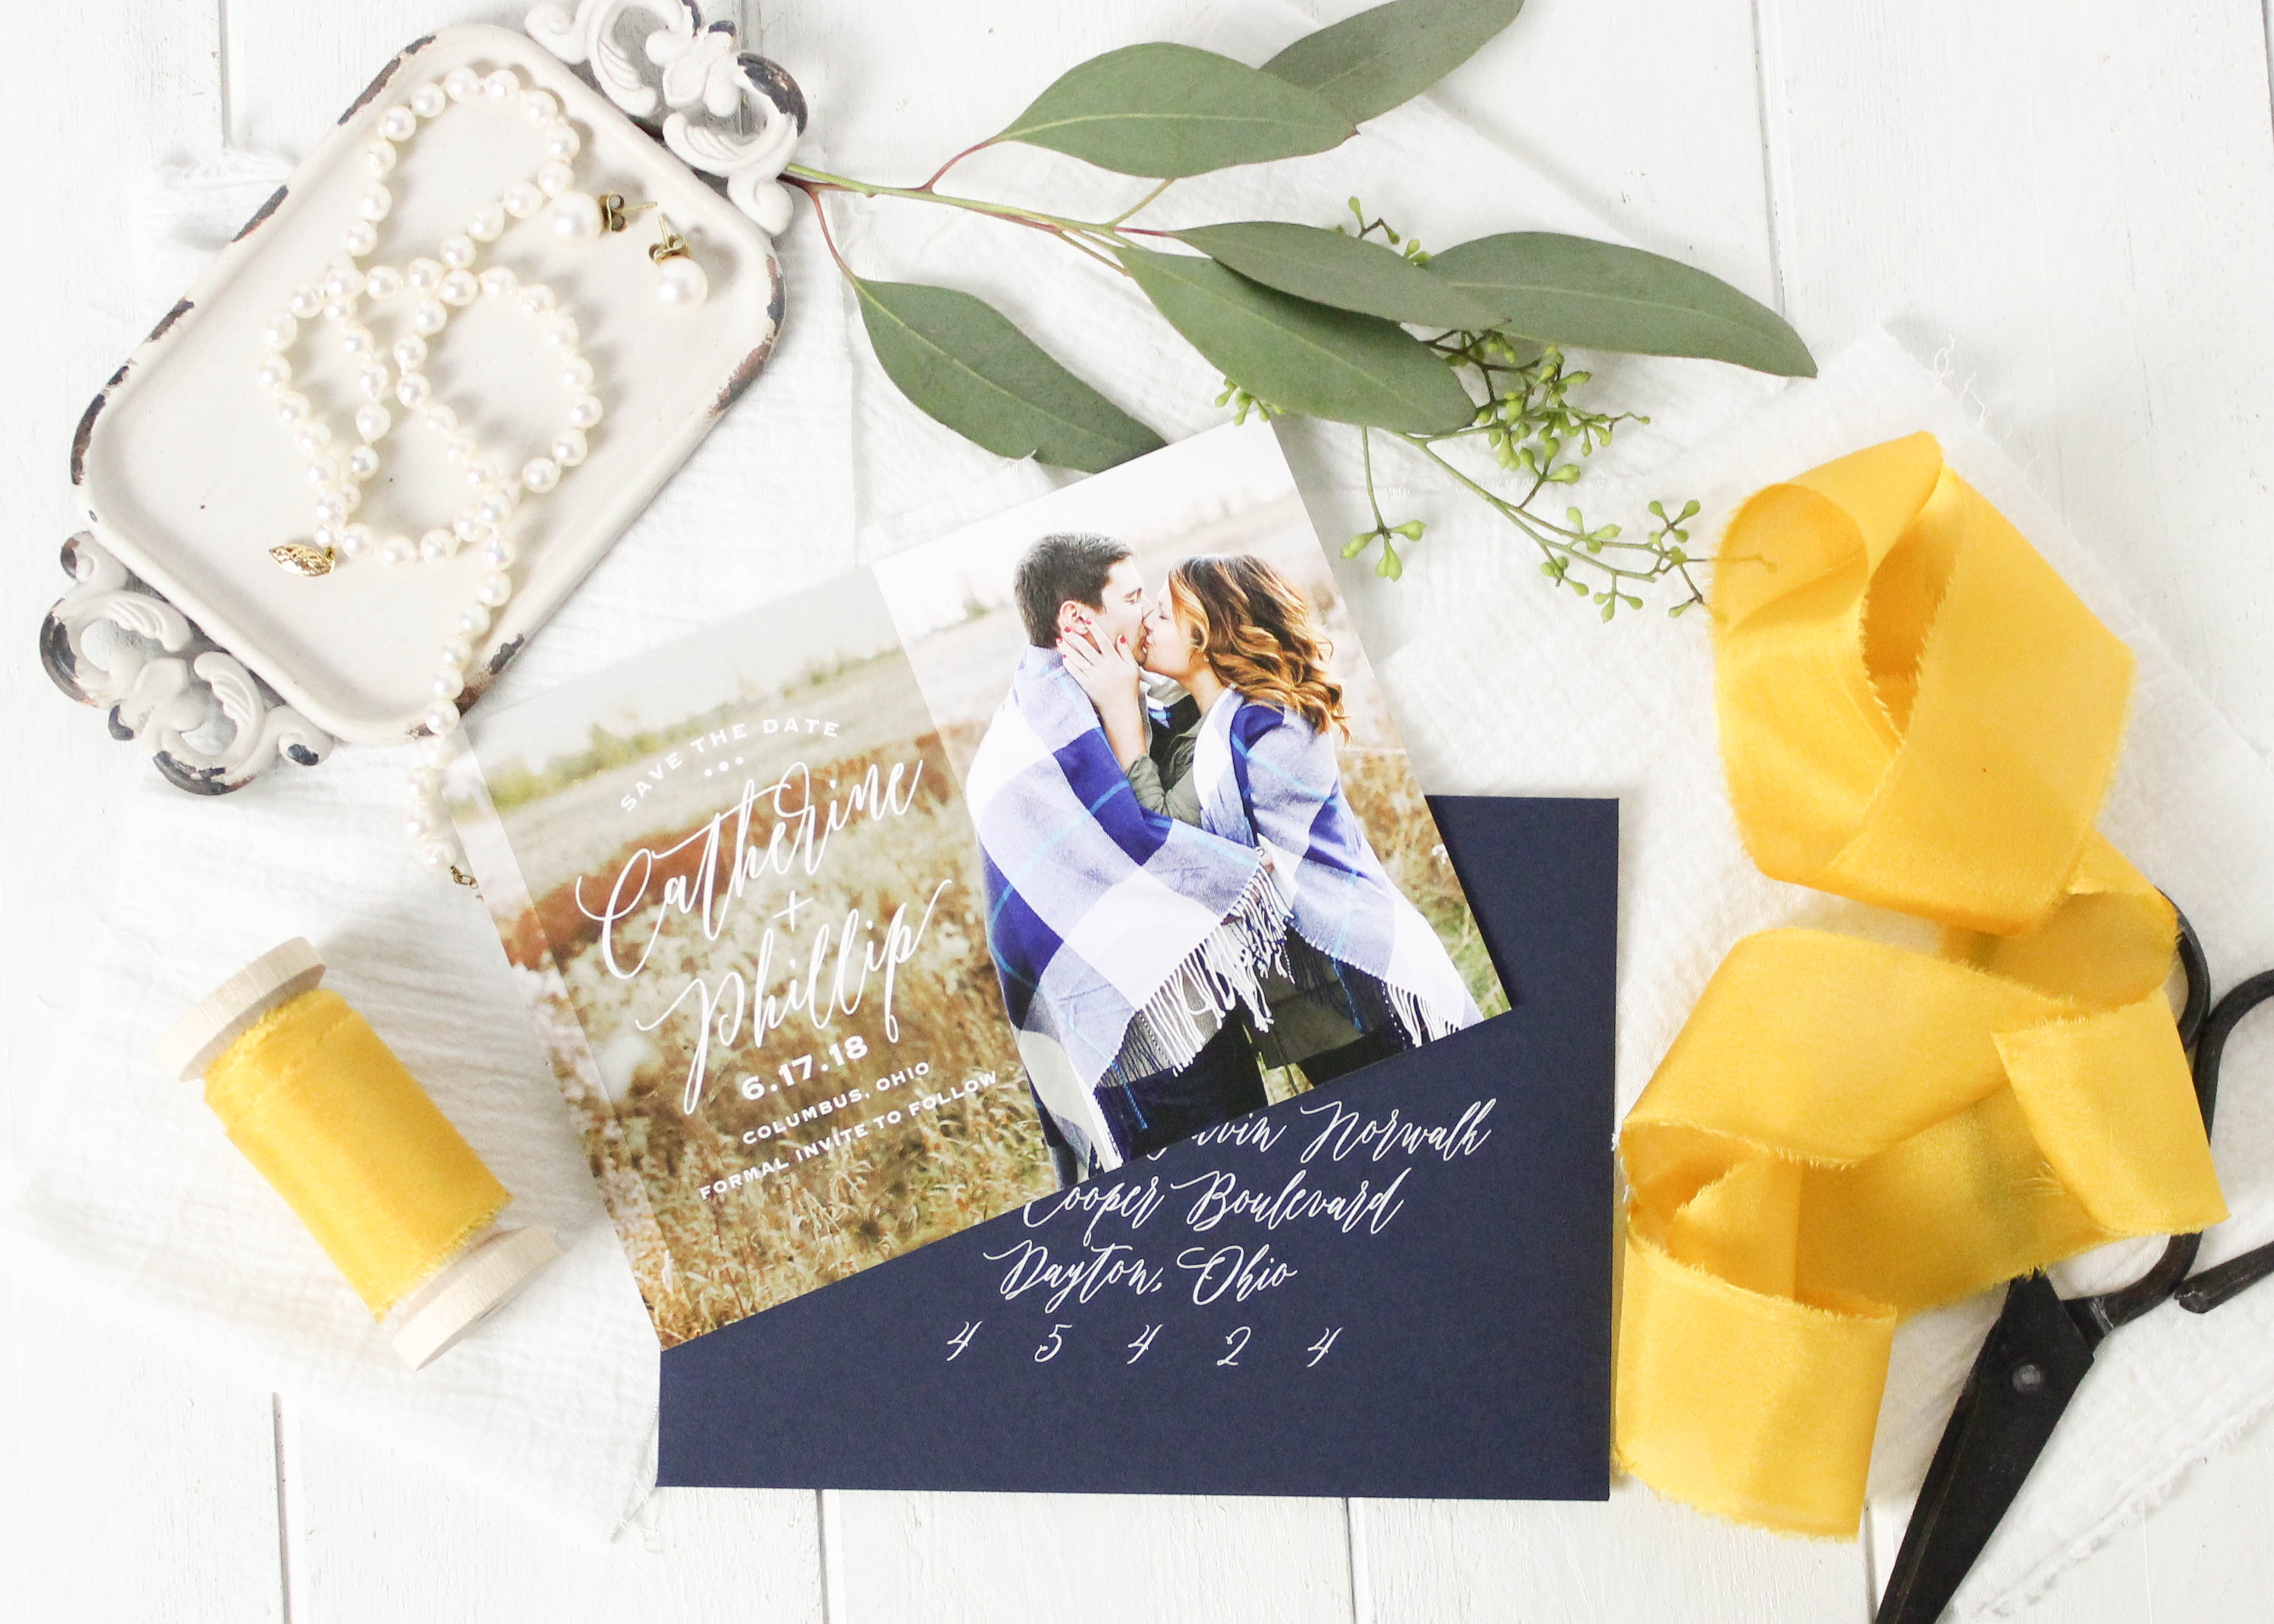 Why You Should Have Save The Dates, Save the Date | Monica Brown Photography | monicabrownphoto.com